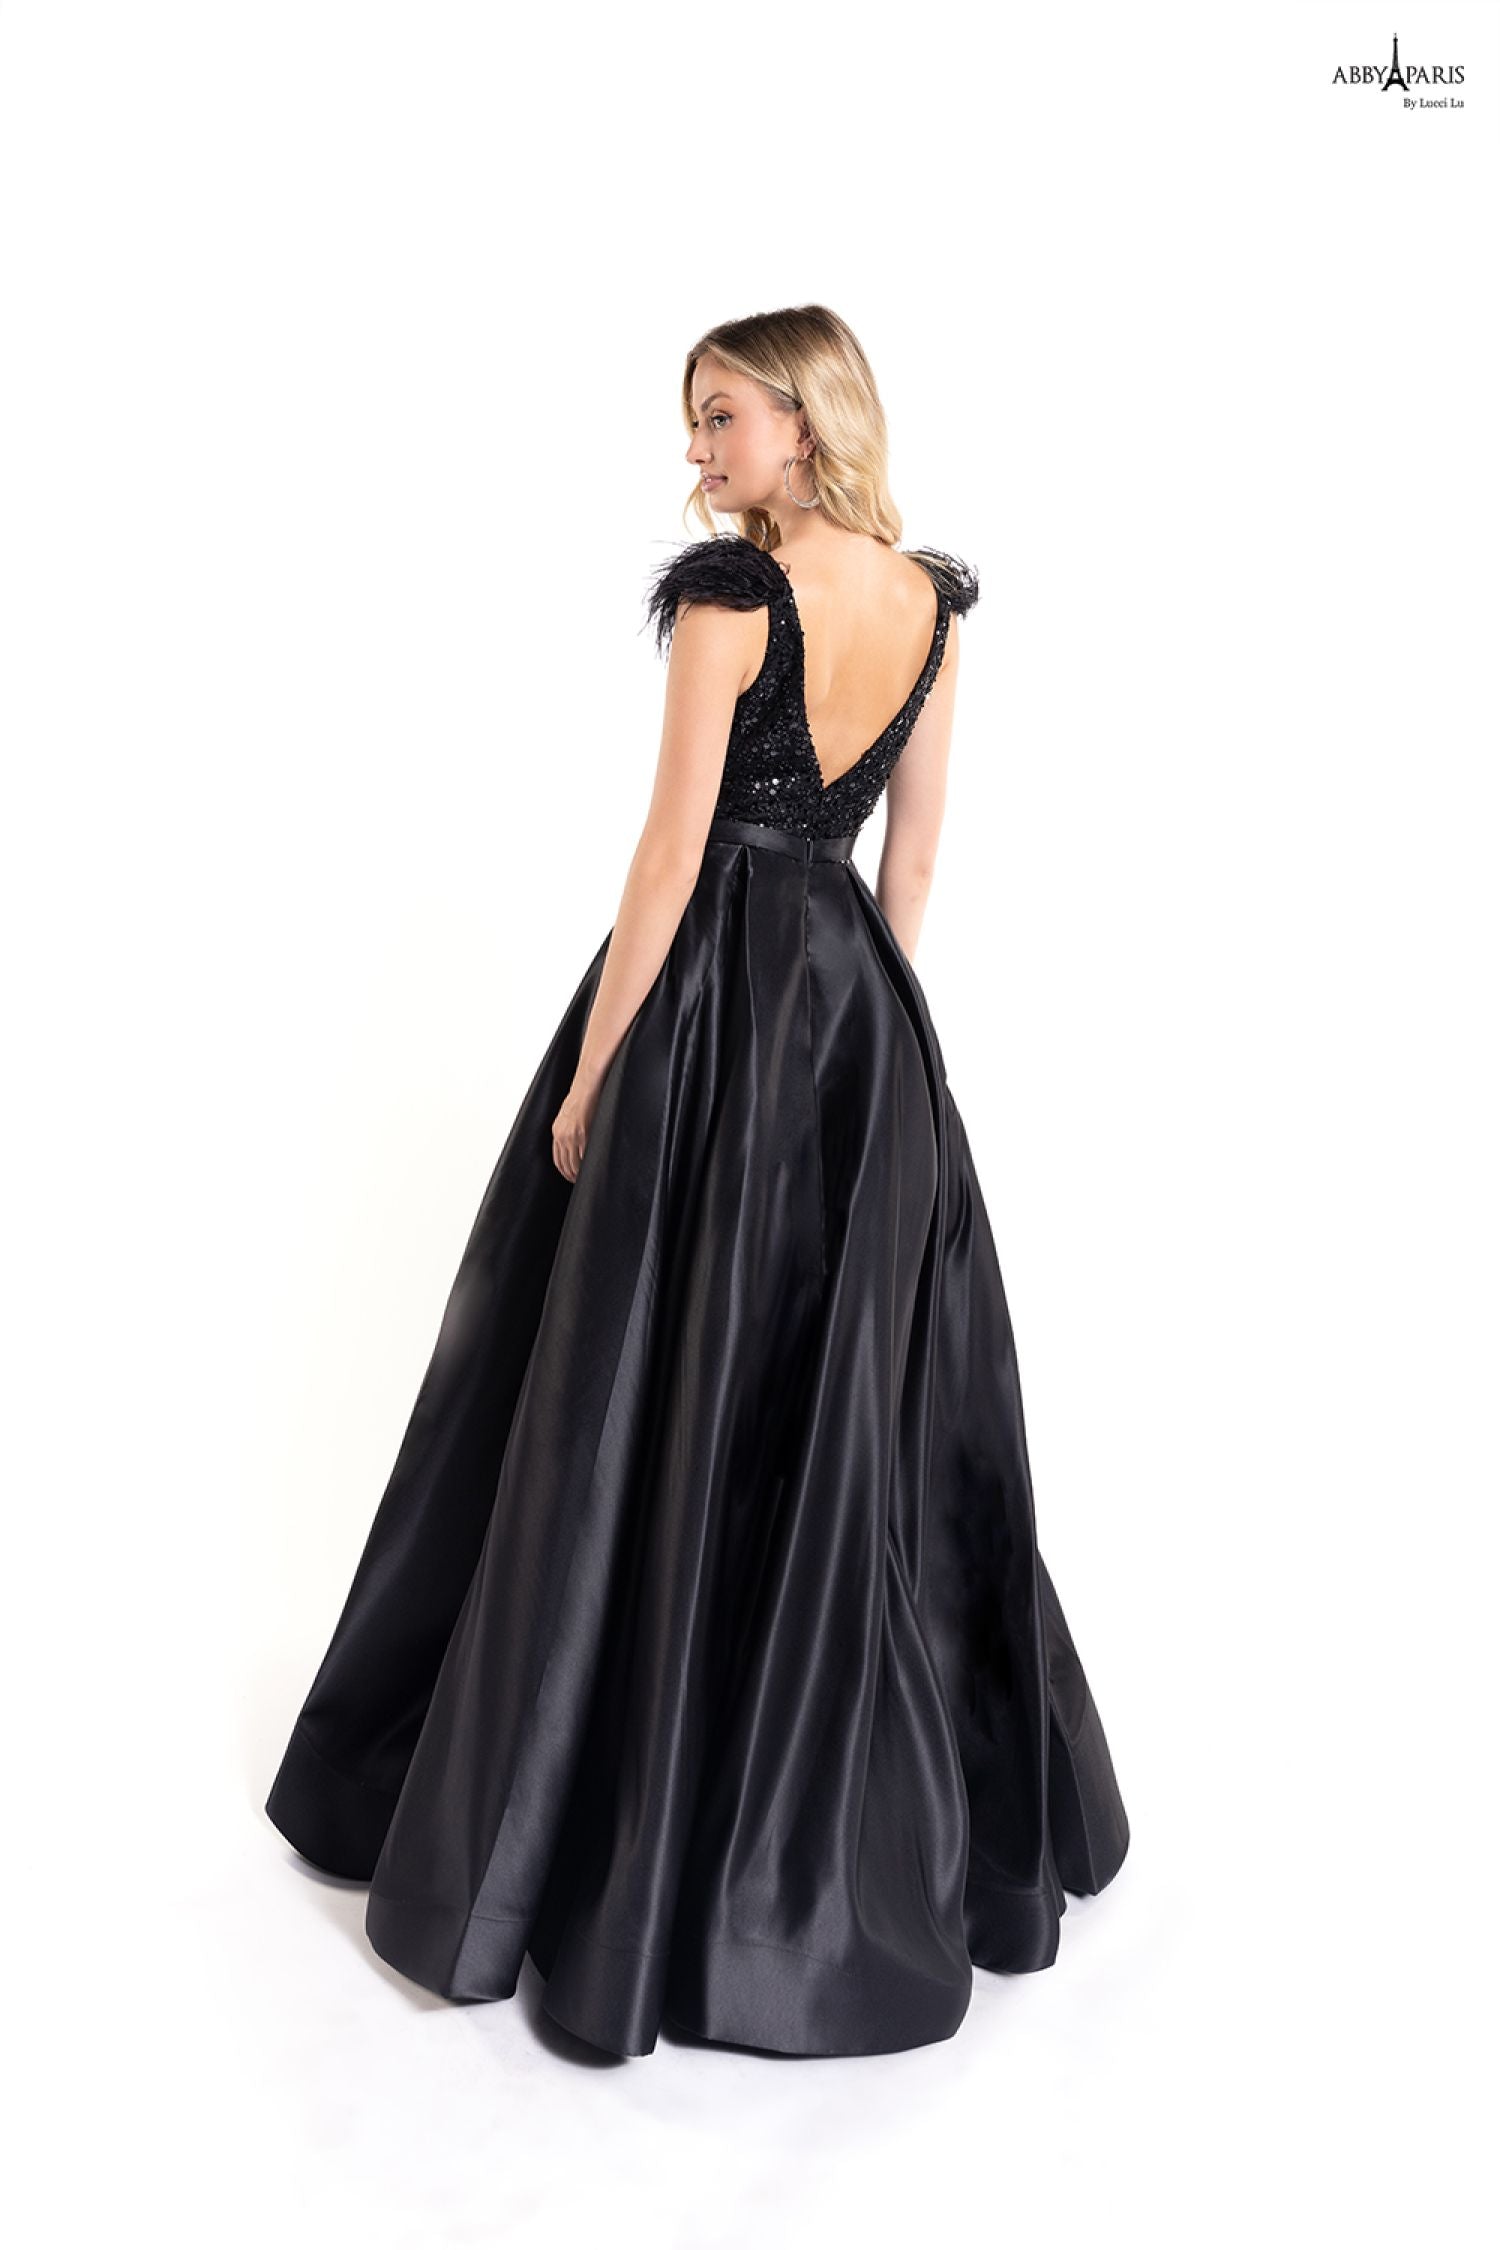 Lucci Lu 90178 Long Feather A Line Ballgown Prom Dress V Neck Formal Gown with beaded & sequin Bodice  Sizes: 0 2 4 6 8 10 12 14 18 20 24  Colors: Black, Burgundy